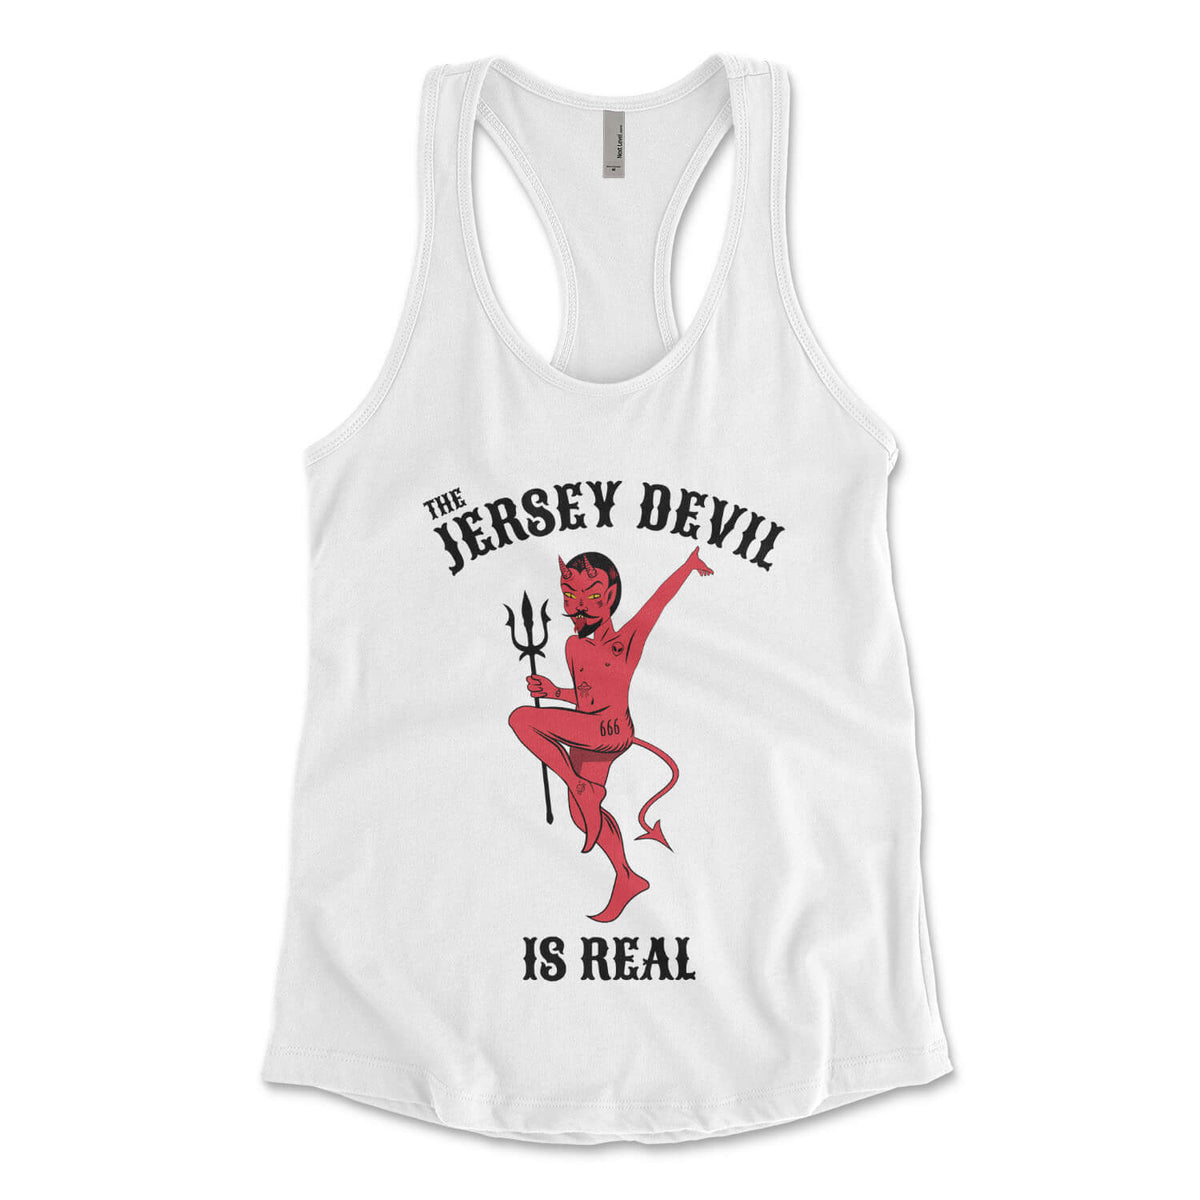 The Jersey Devil Is Real womens white racerback tank top from Phillygoat